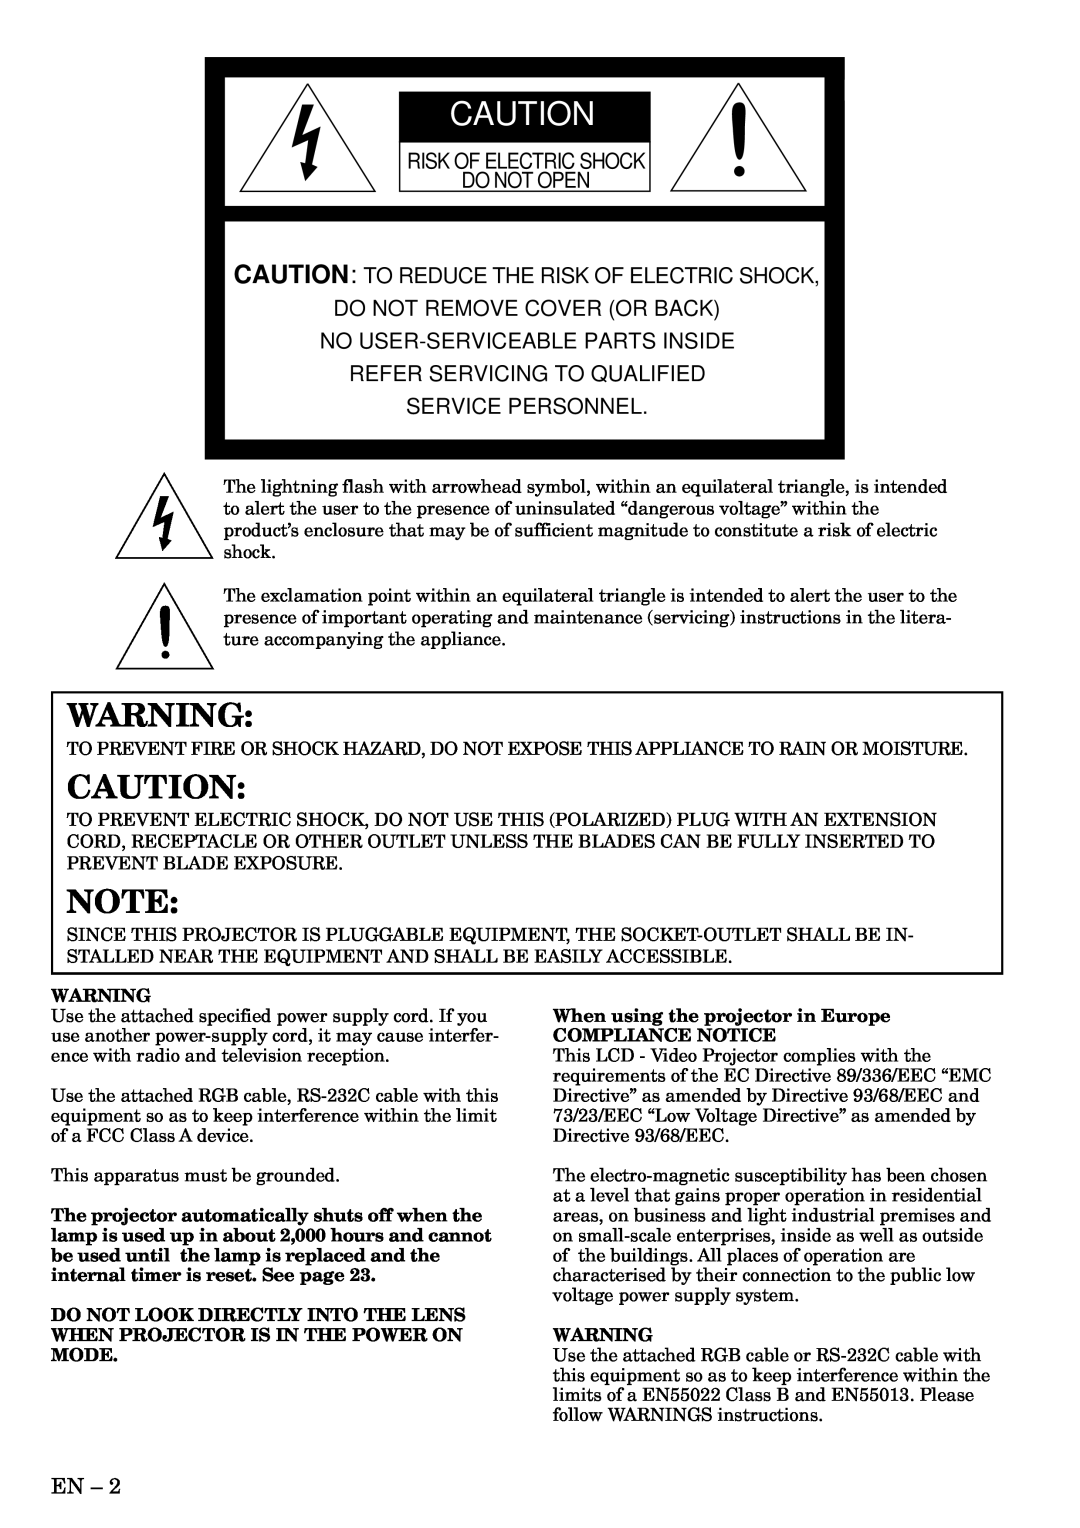 Mitsubishi Electronics X80 user manual Risk Of Electric Shock Do Not Open, Caution To Reduce The Risk Of Electric Shock 